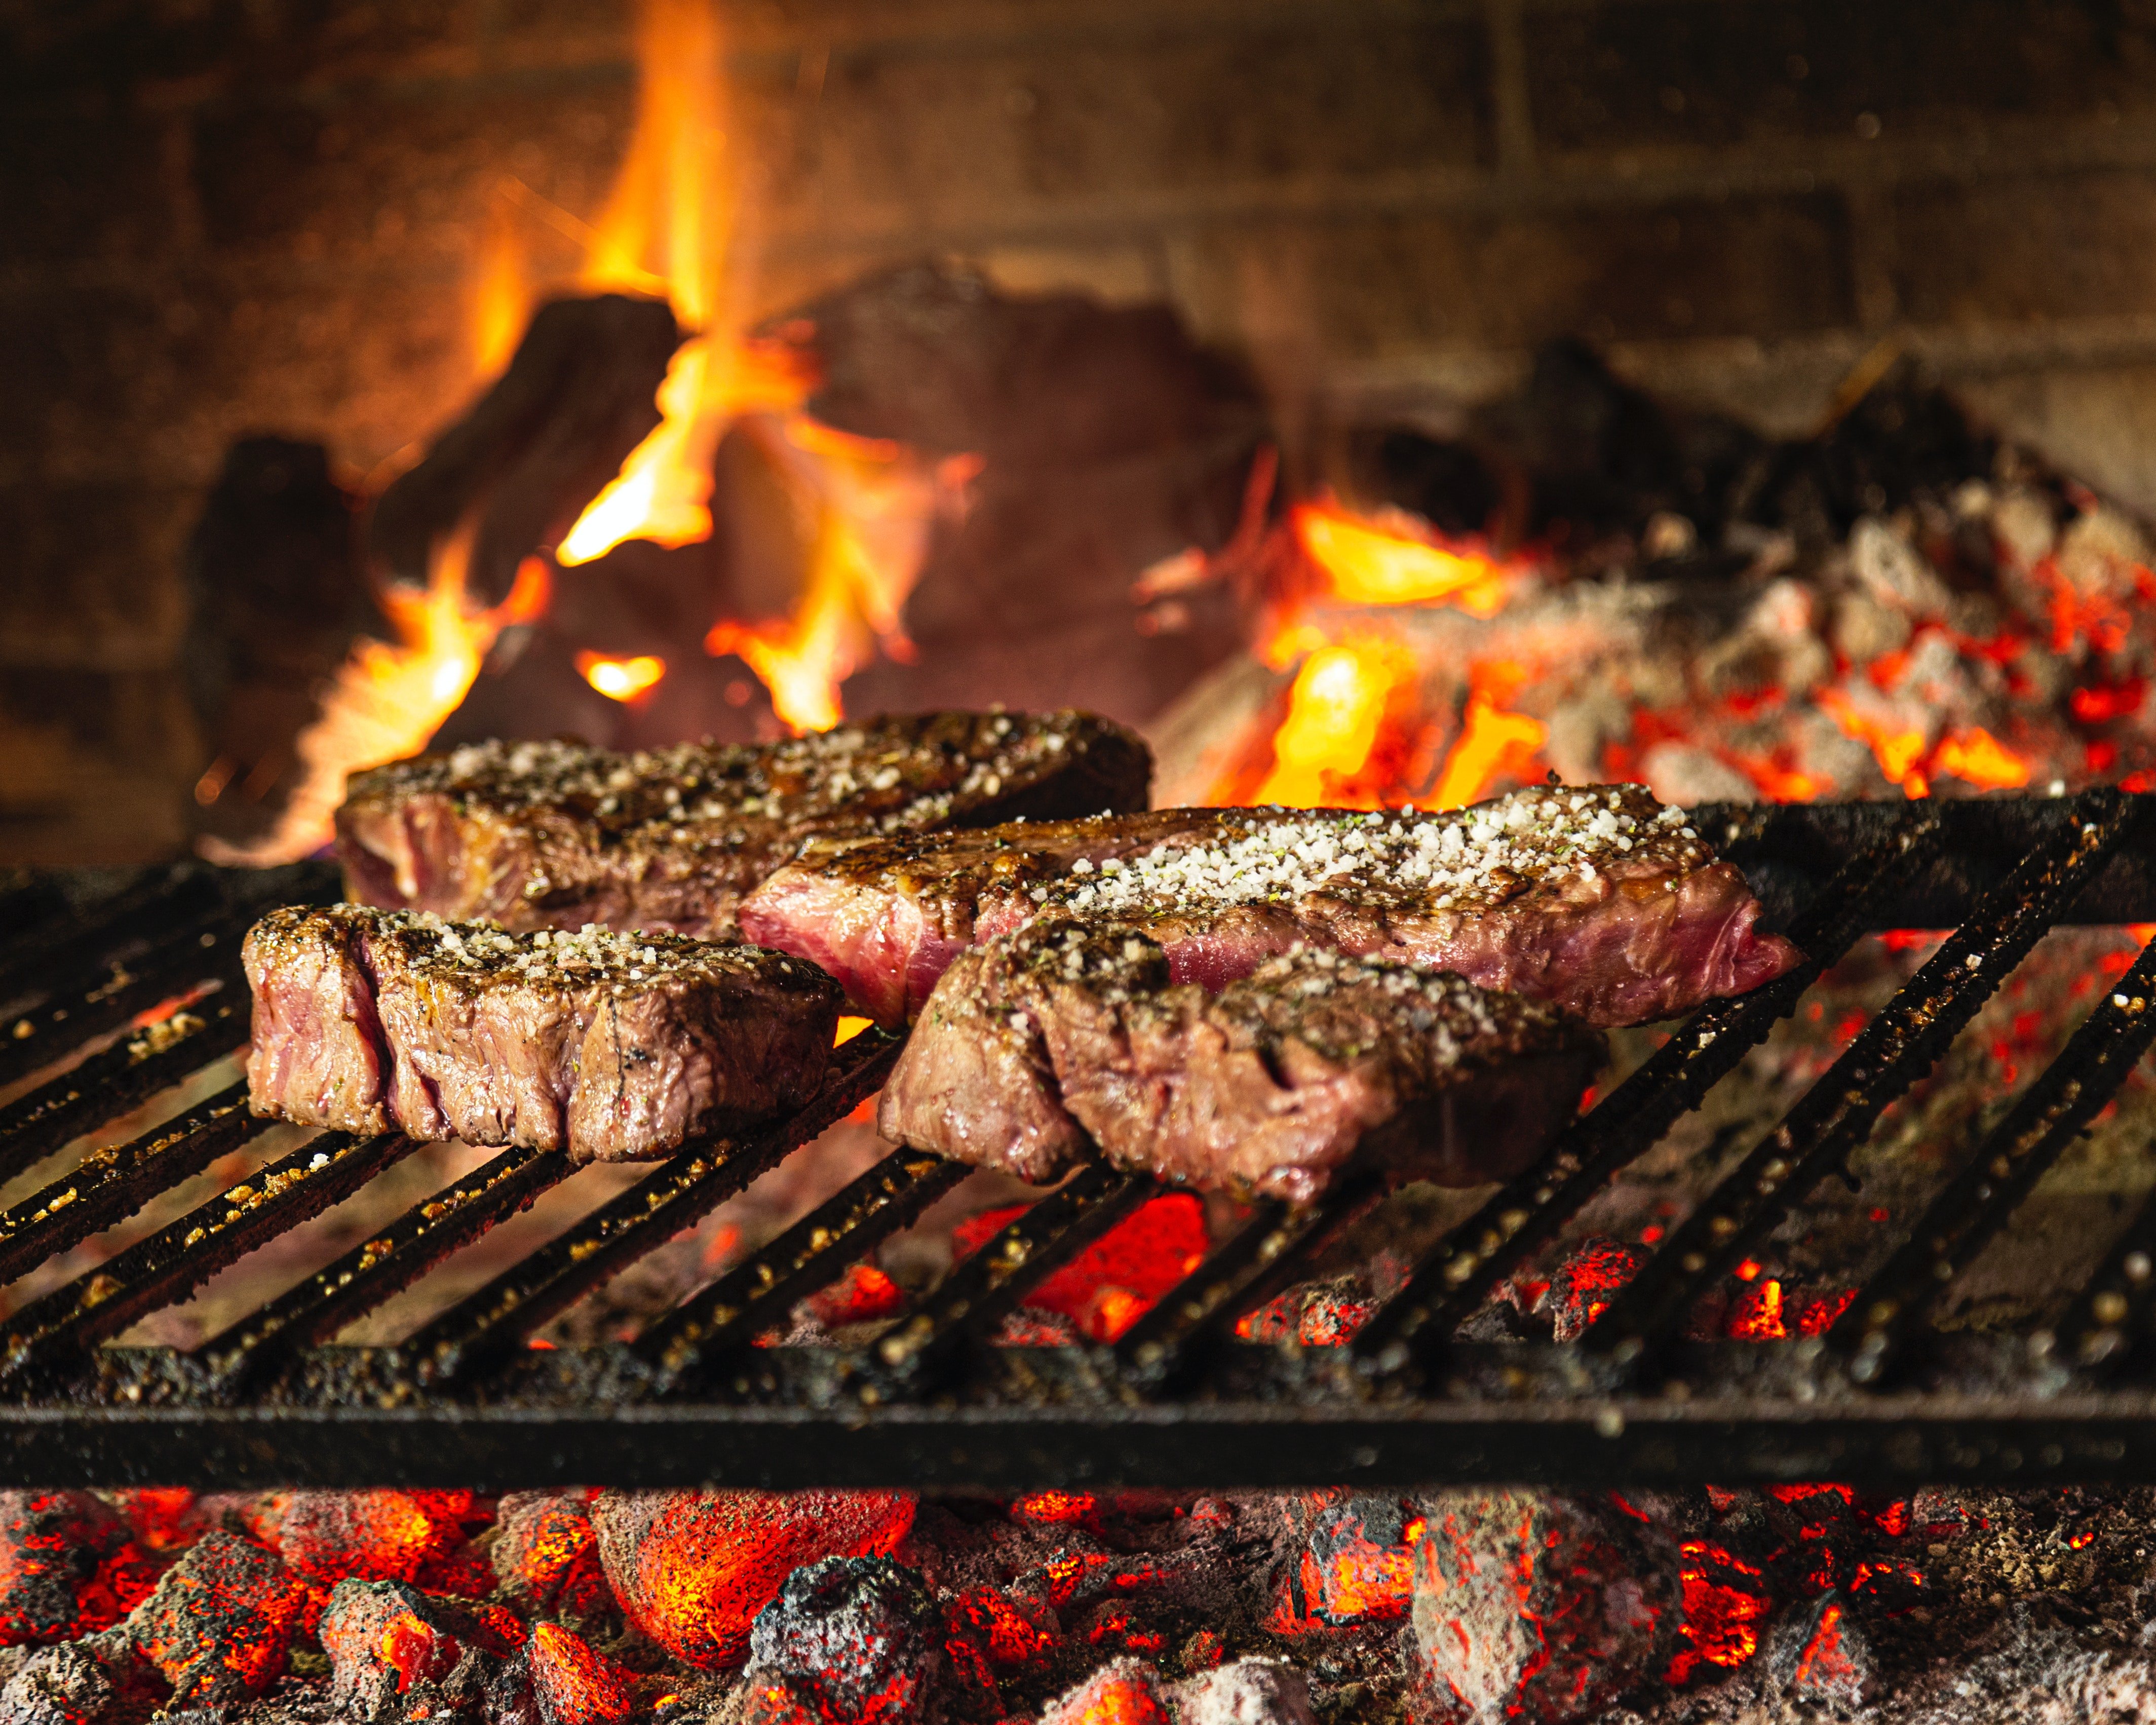 Pictured - Grilled meat on a charcoal grill | Source: Pexels 